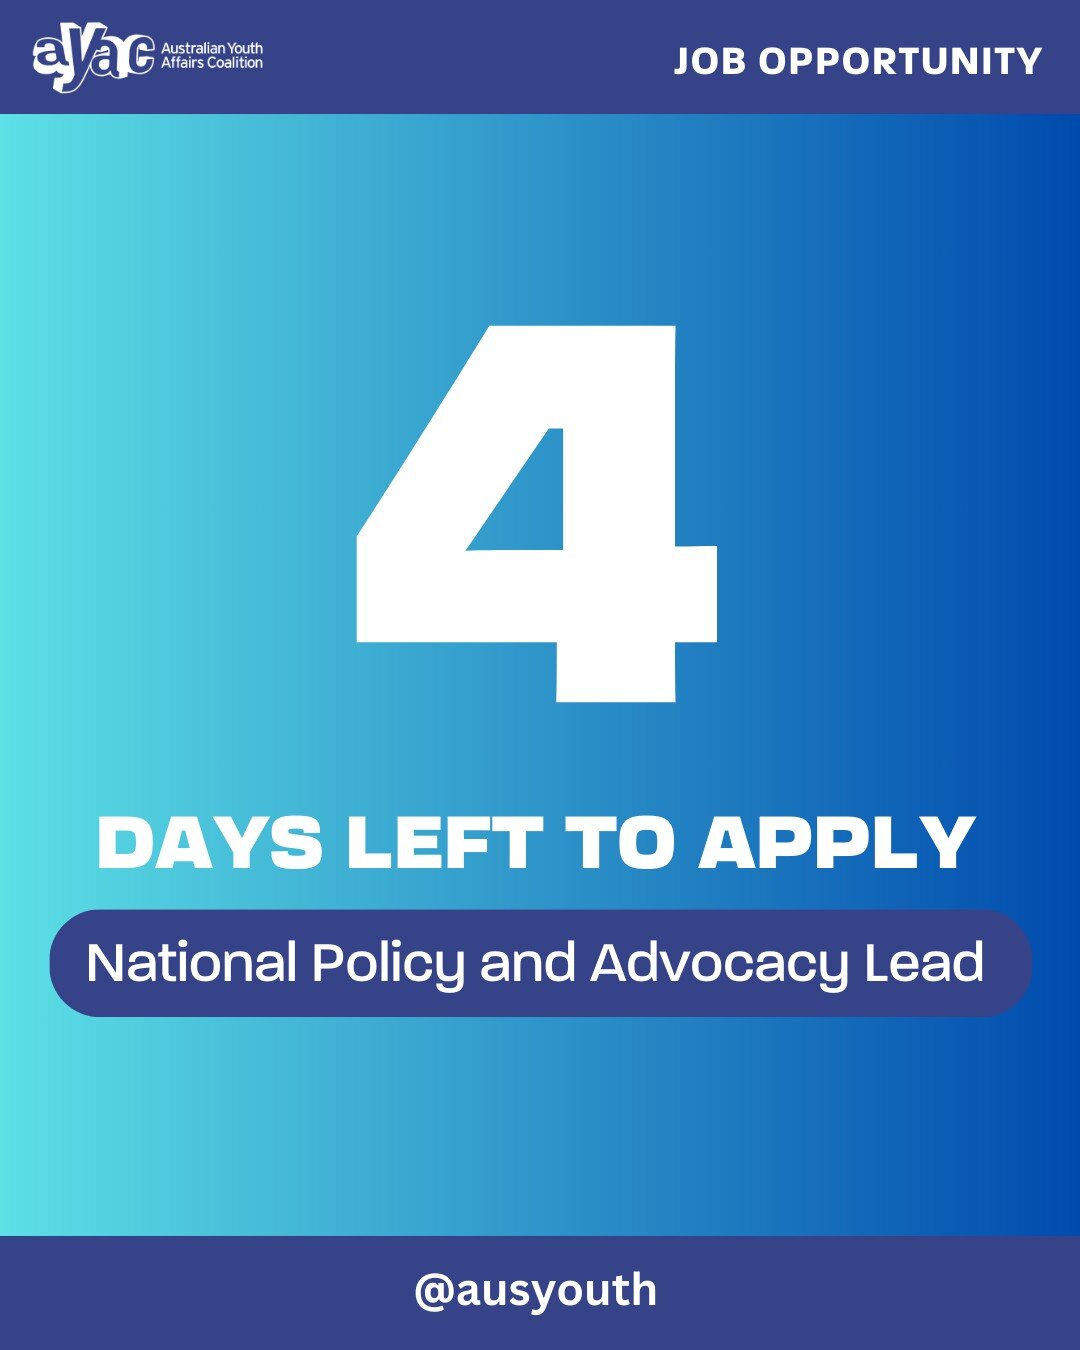 Join Our Team: National Policy and Advocacy Lead Opportunity at AYAC 🚀

This role is closing in 4 days! 

Are you passionate about making a positive impact on the lives of young people in Australia? AYAC is on the lookout for a dynamic and dedicated